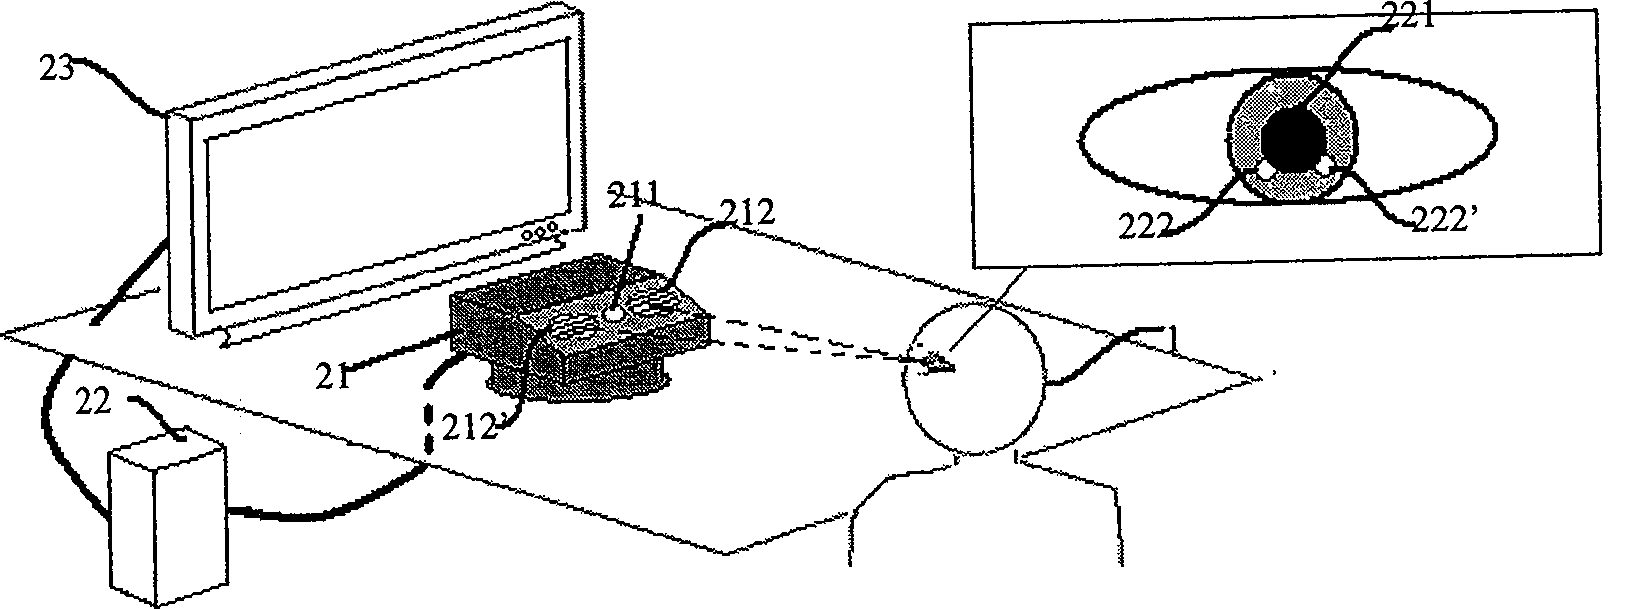 System for performing non-contact type human-machine interaction by vision